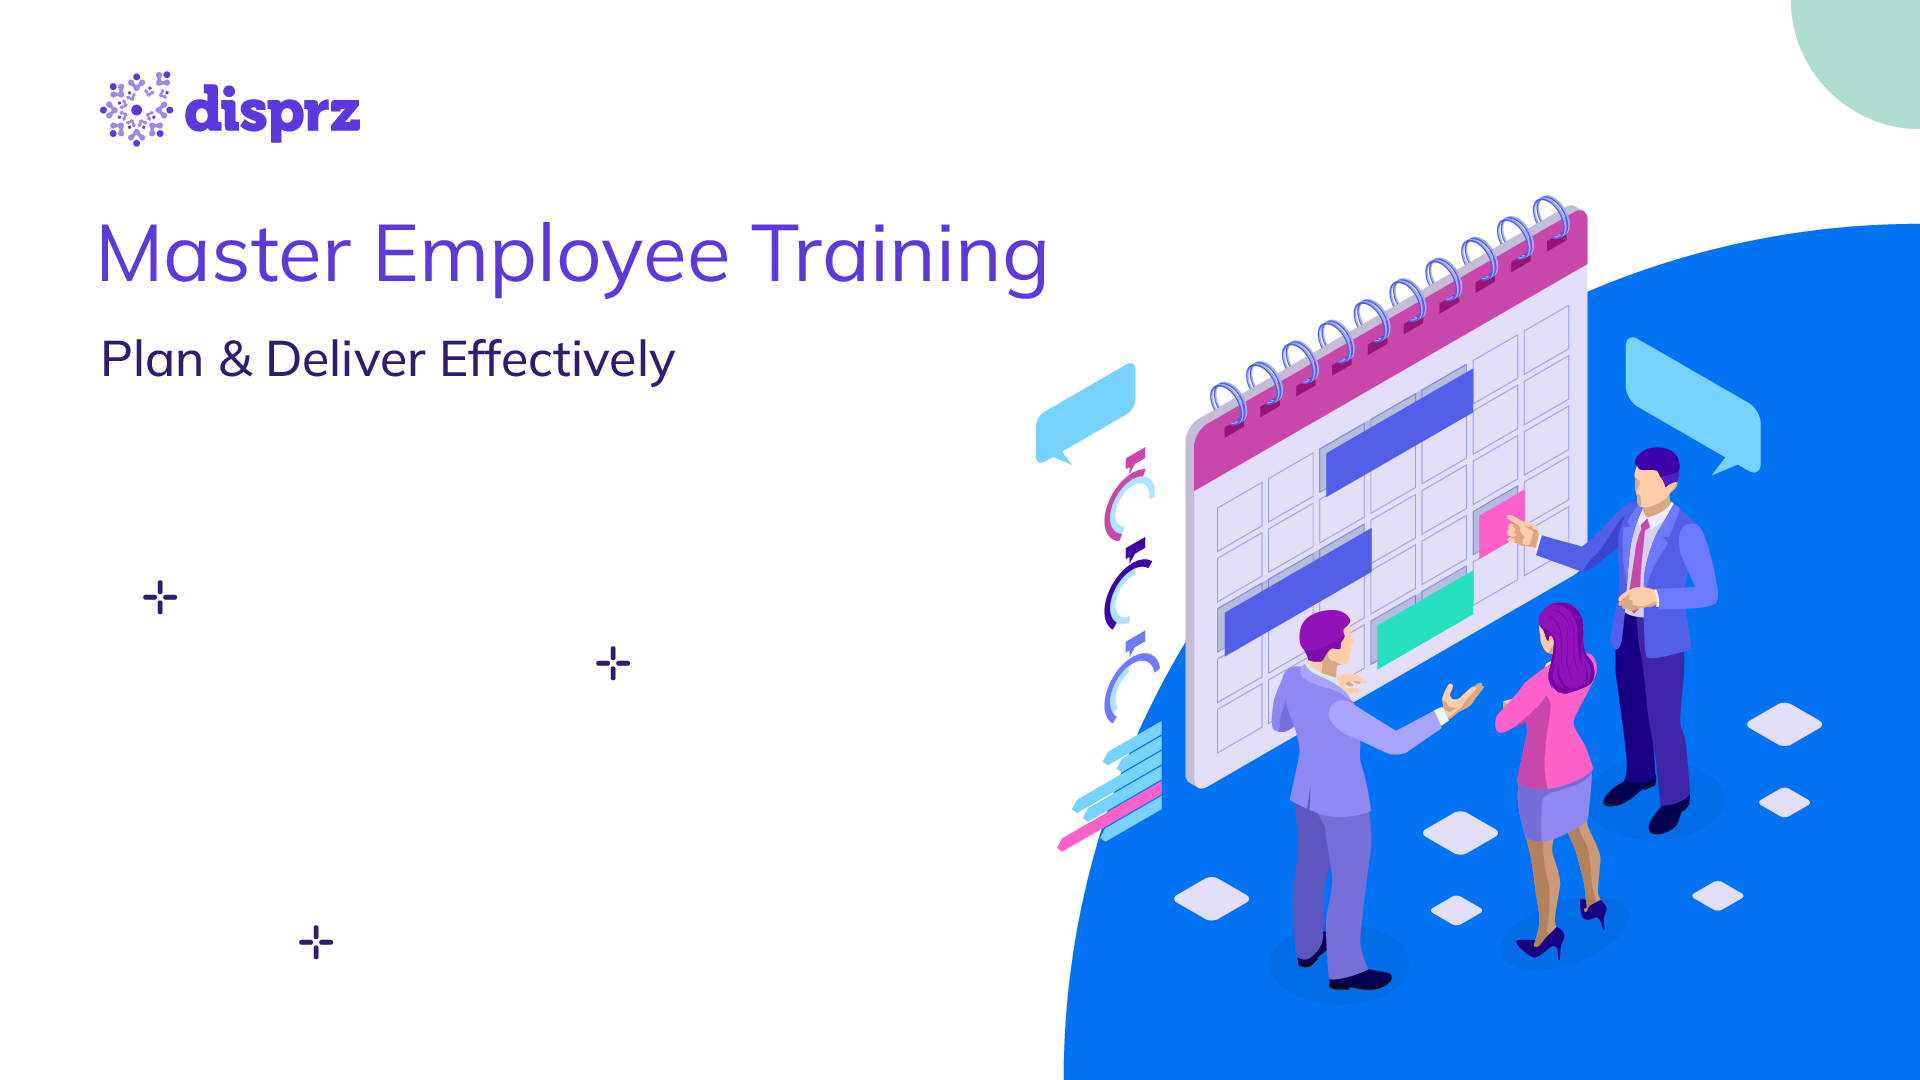 Master Employee Training - Plan & Deliver Effectively